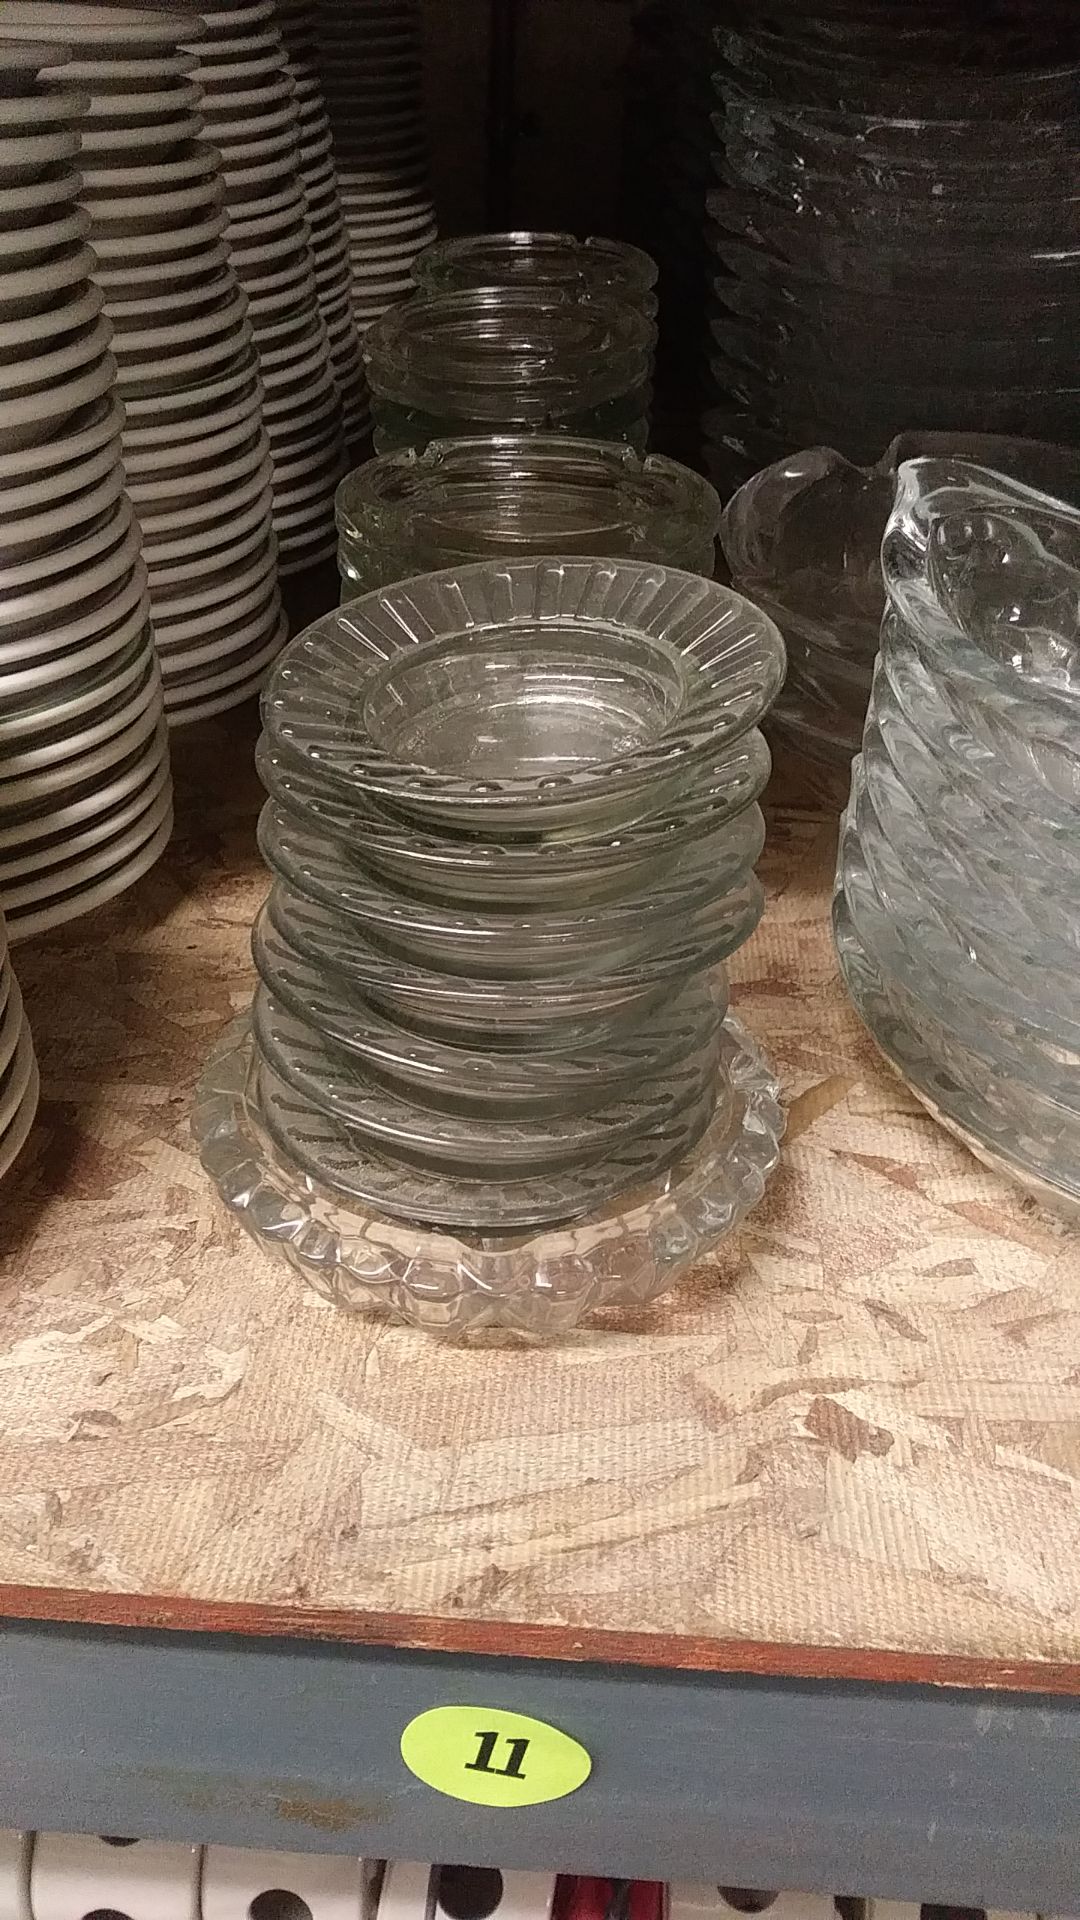 ASSORTED 4" DIA ROUND GLASS ASHTRAYS (includes QTY 39 in this lot) - Image 4 of 4